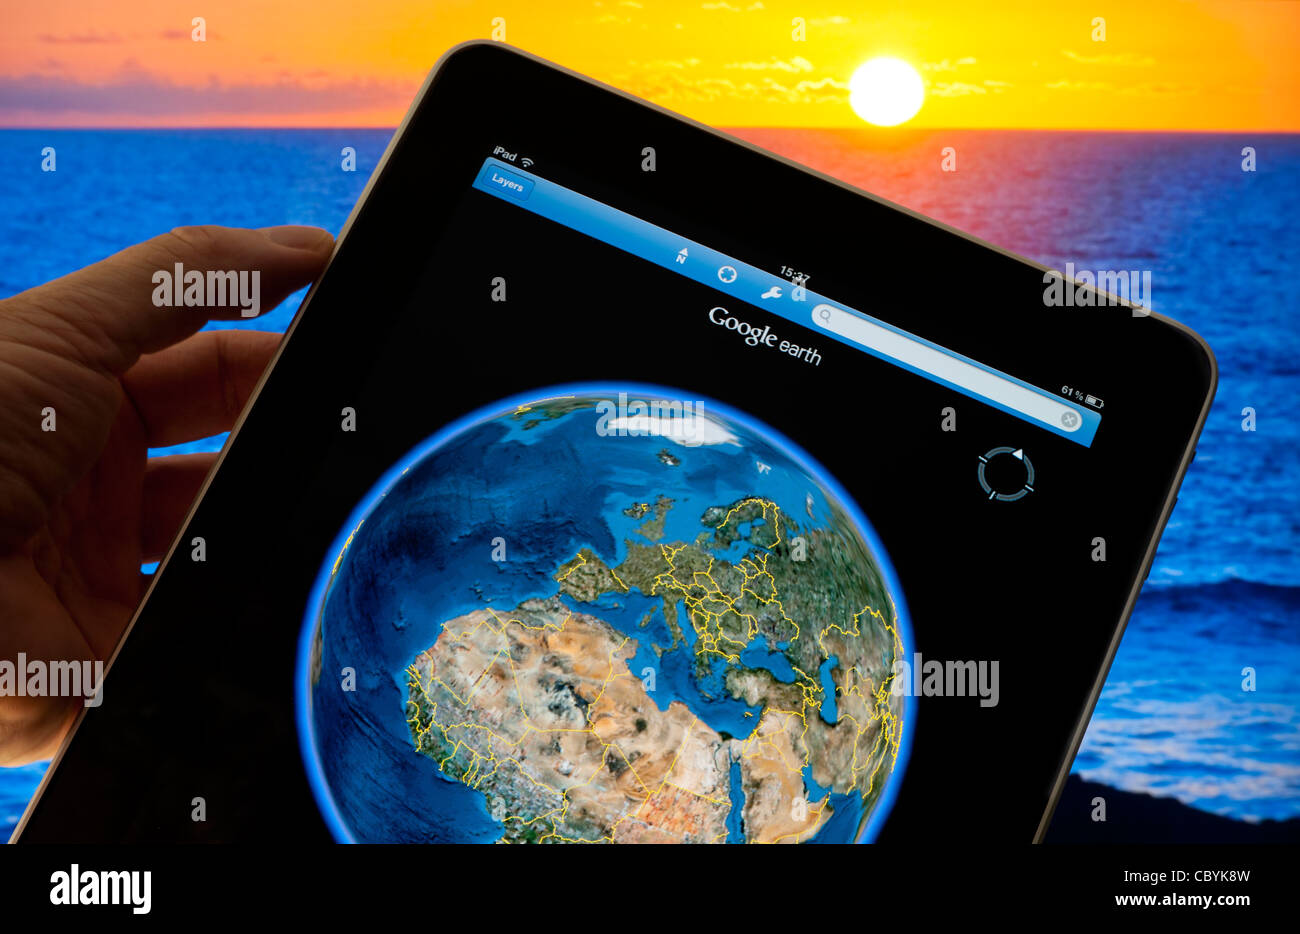 Apple iPad smart tablet with Google Earth streaming application 4g on screen featuring world globe, with UK France Africa etc, sunset in background Stock Photo